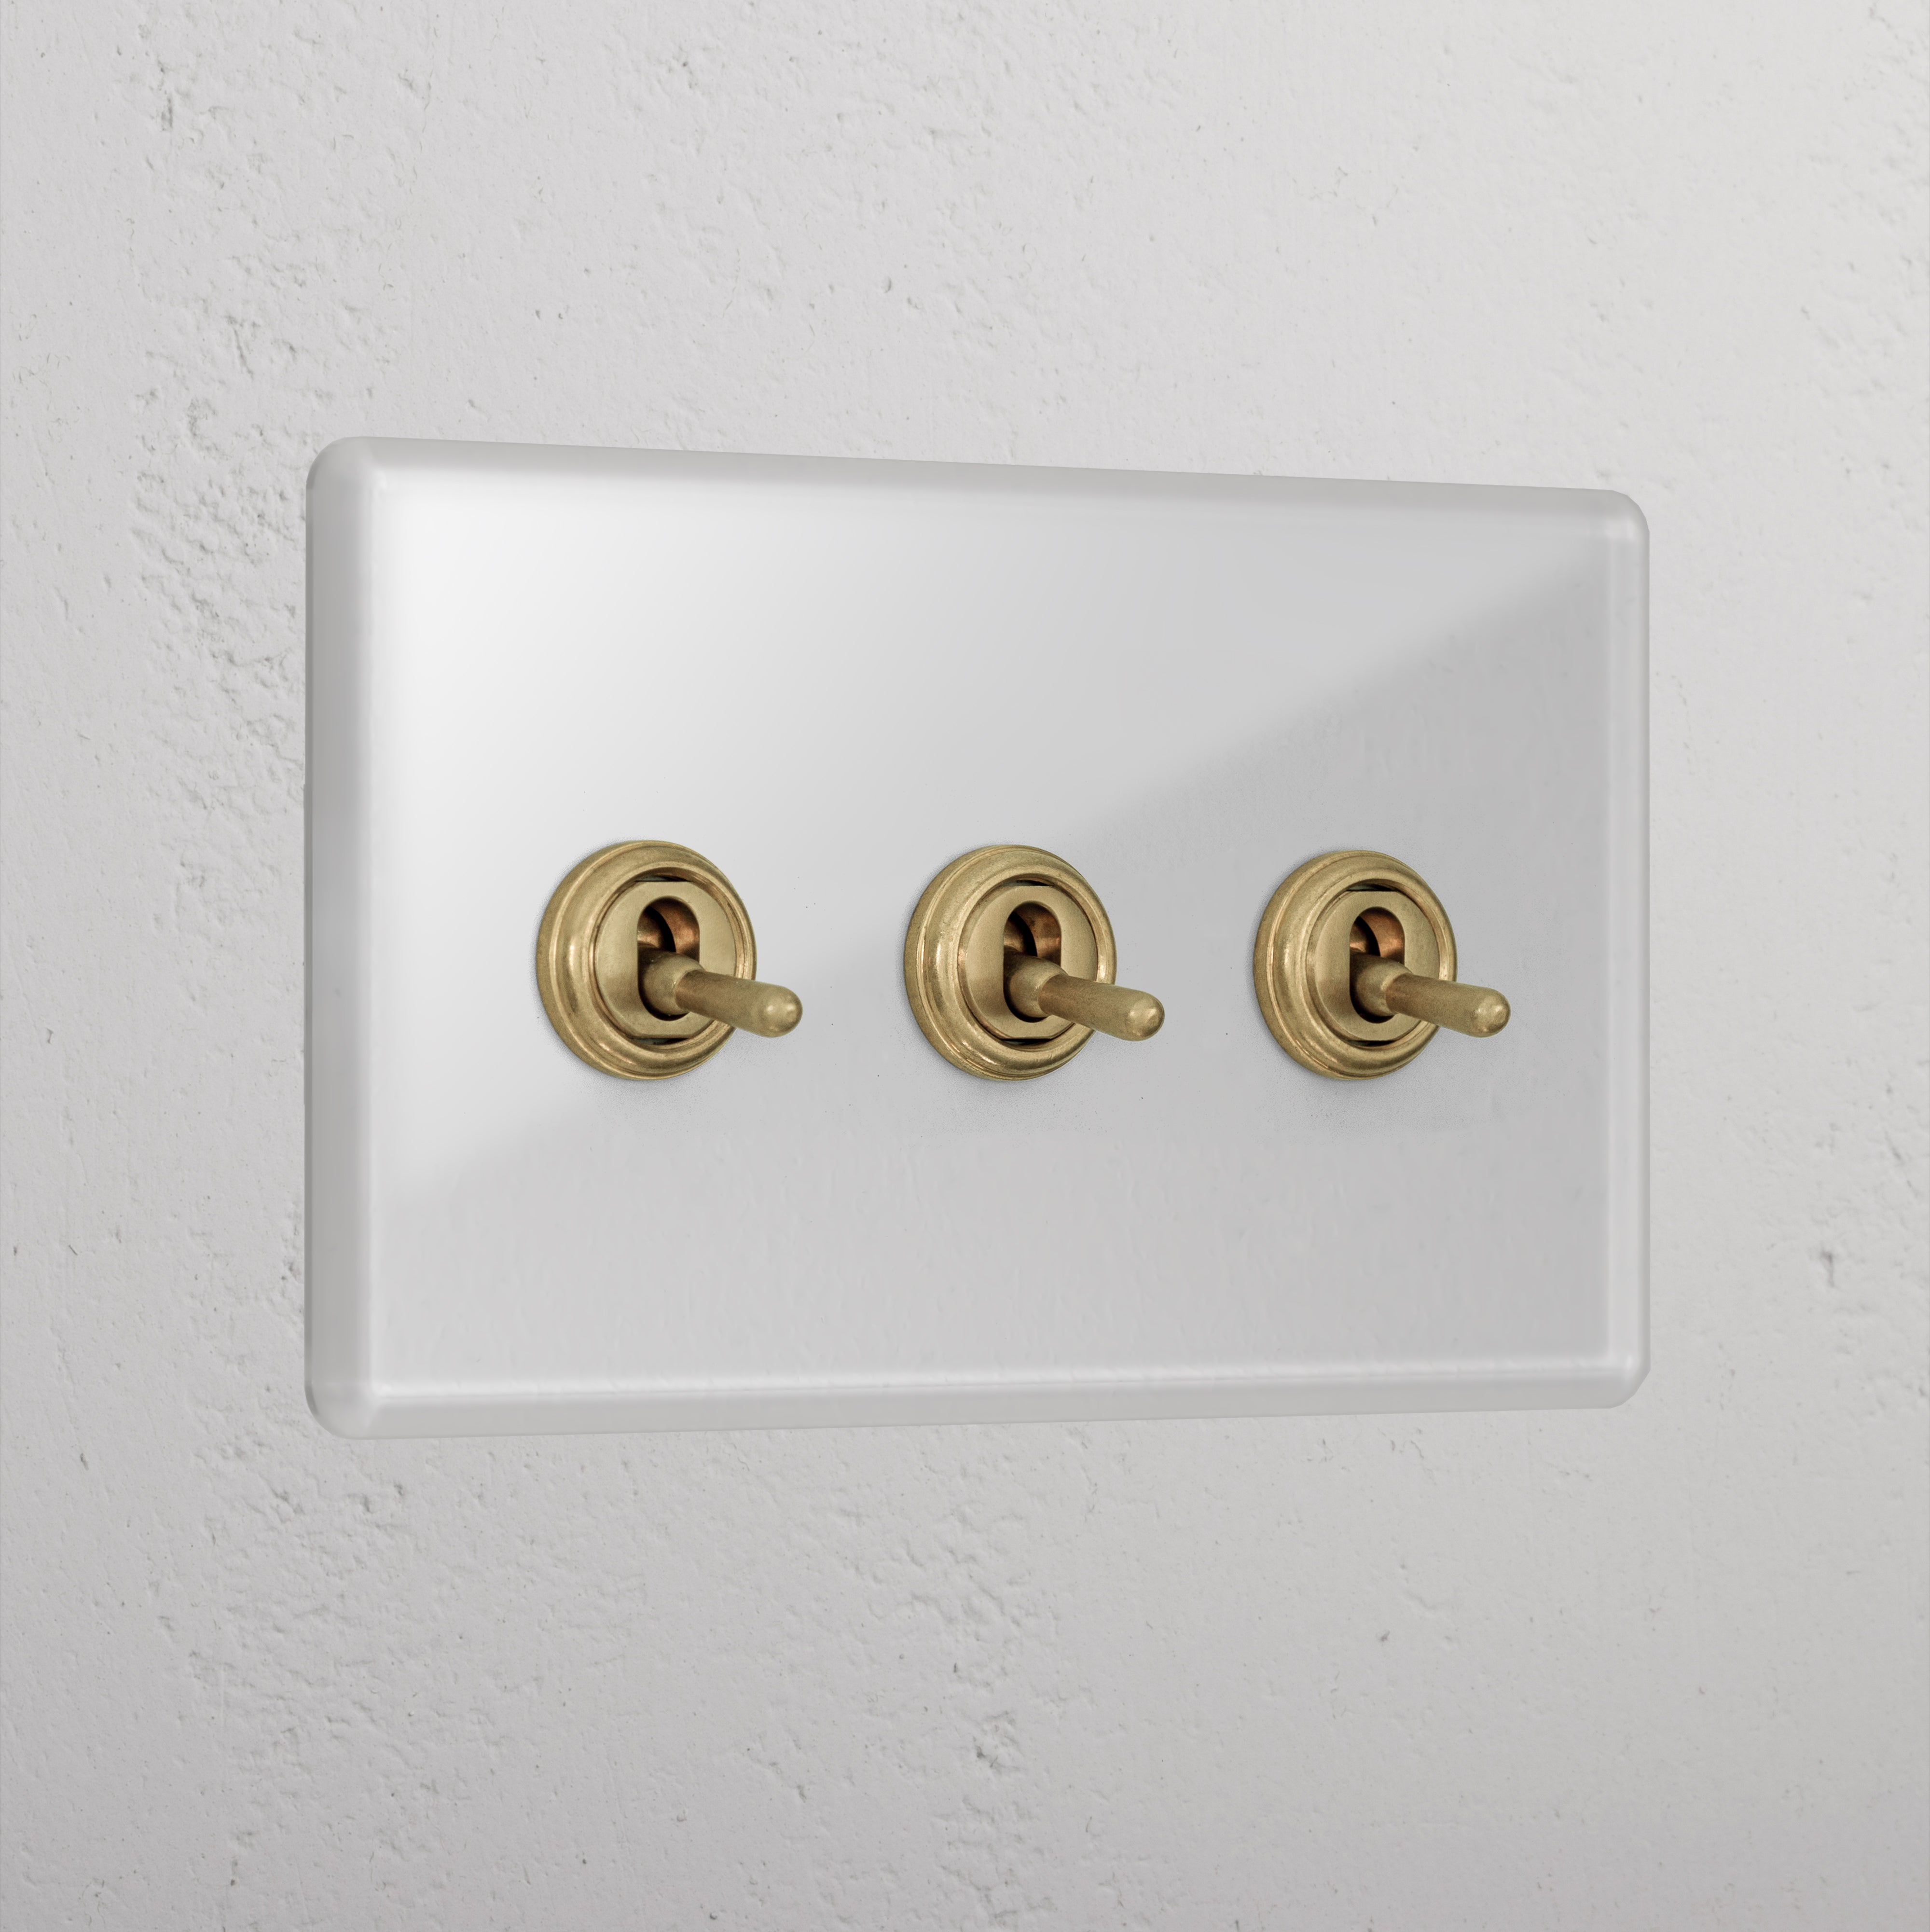 Clear Antique Brass 3 Gang 2 Way Premium Toggle Light Switch